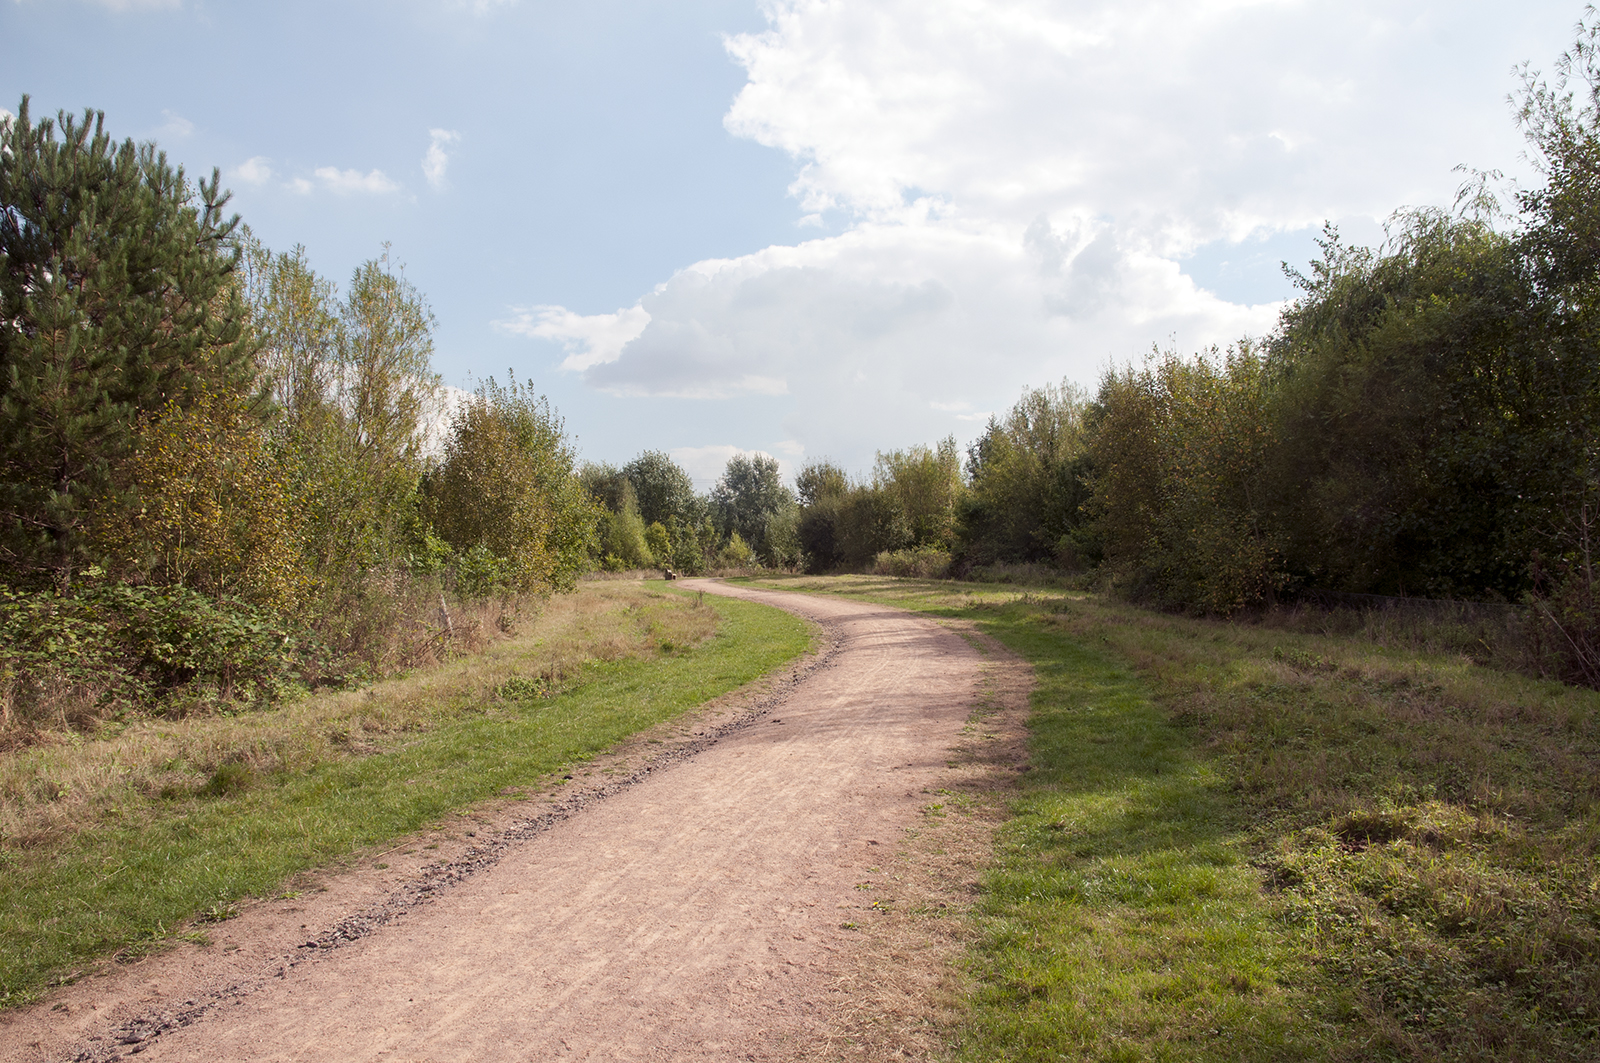 20160921-Havering-Tylers-Common-Autumn-All-purpose-path-DSC_8652